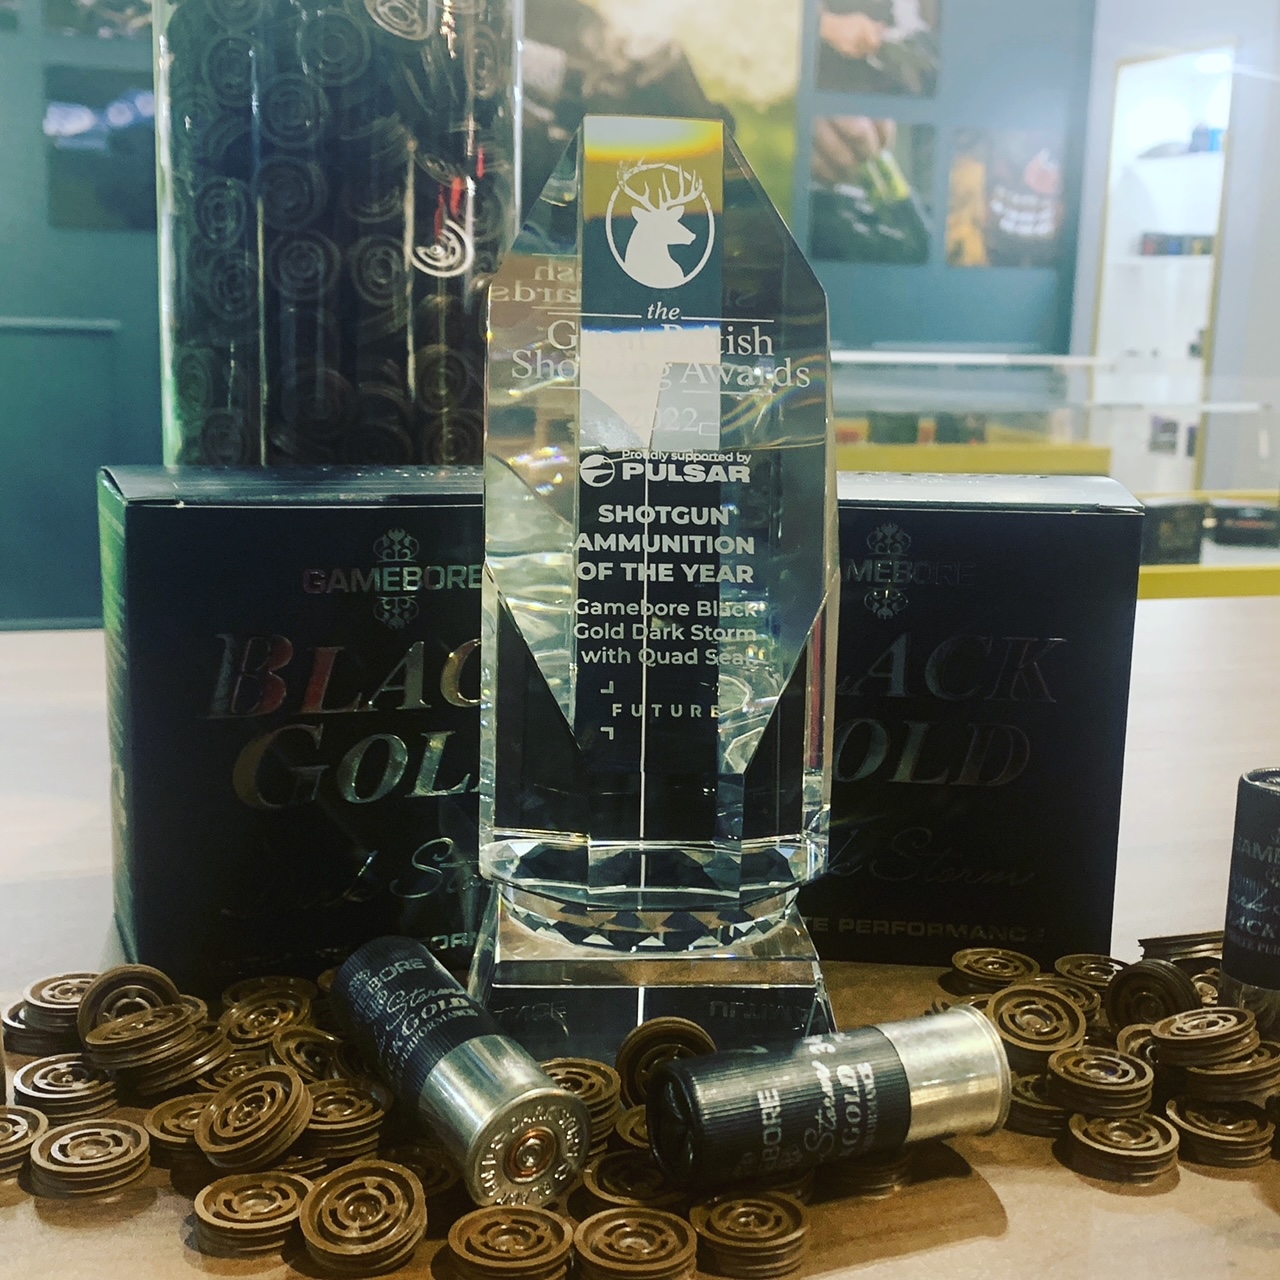 Gamebore Voted Shotgun Ammunition of the Year at the Great British Shooting Awards